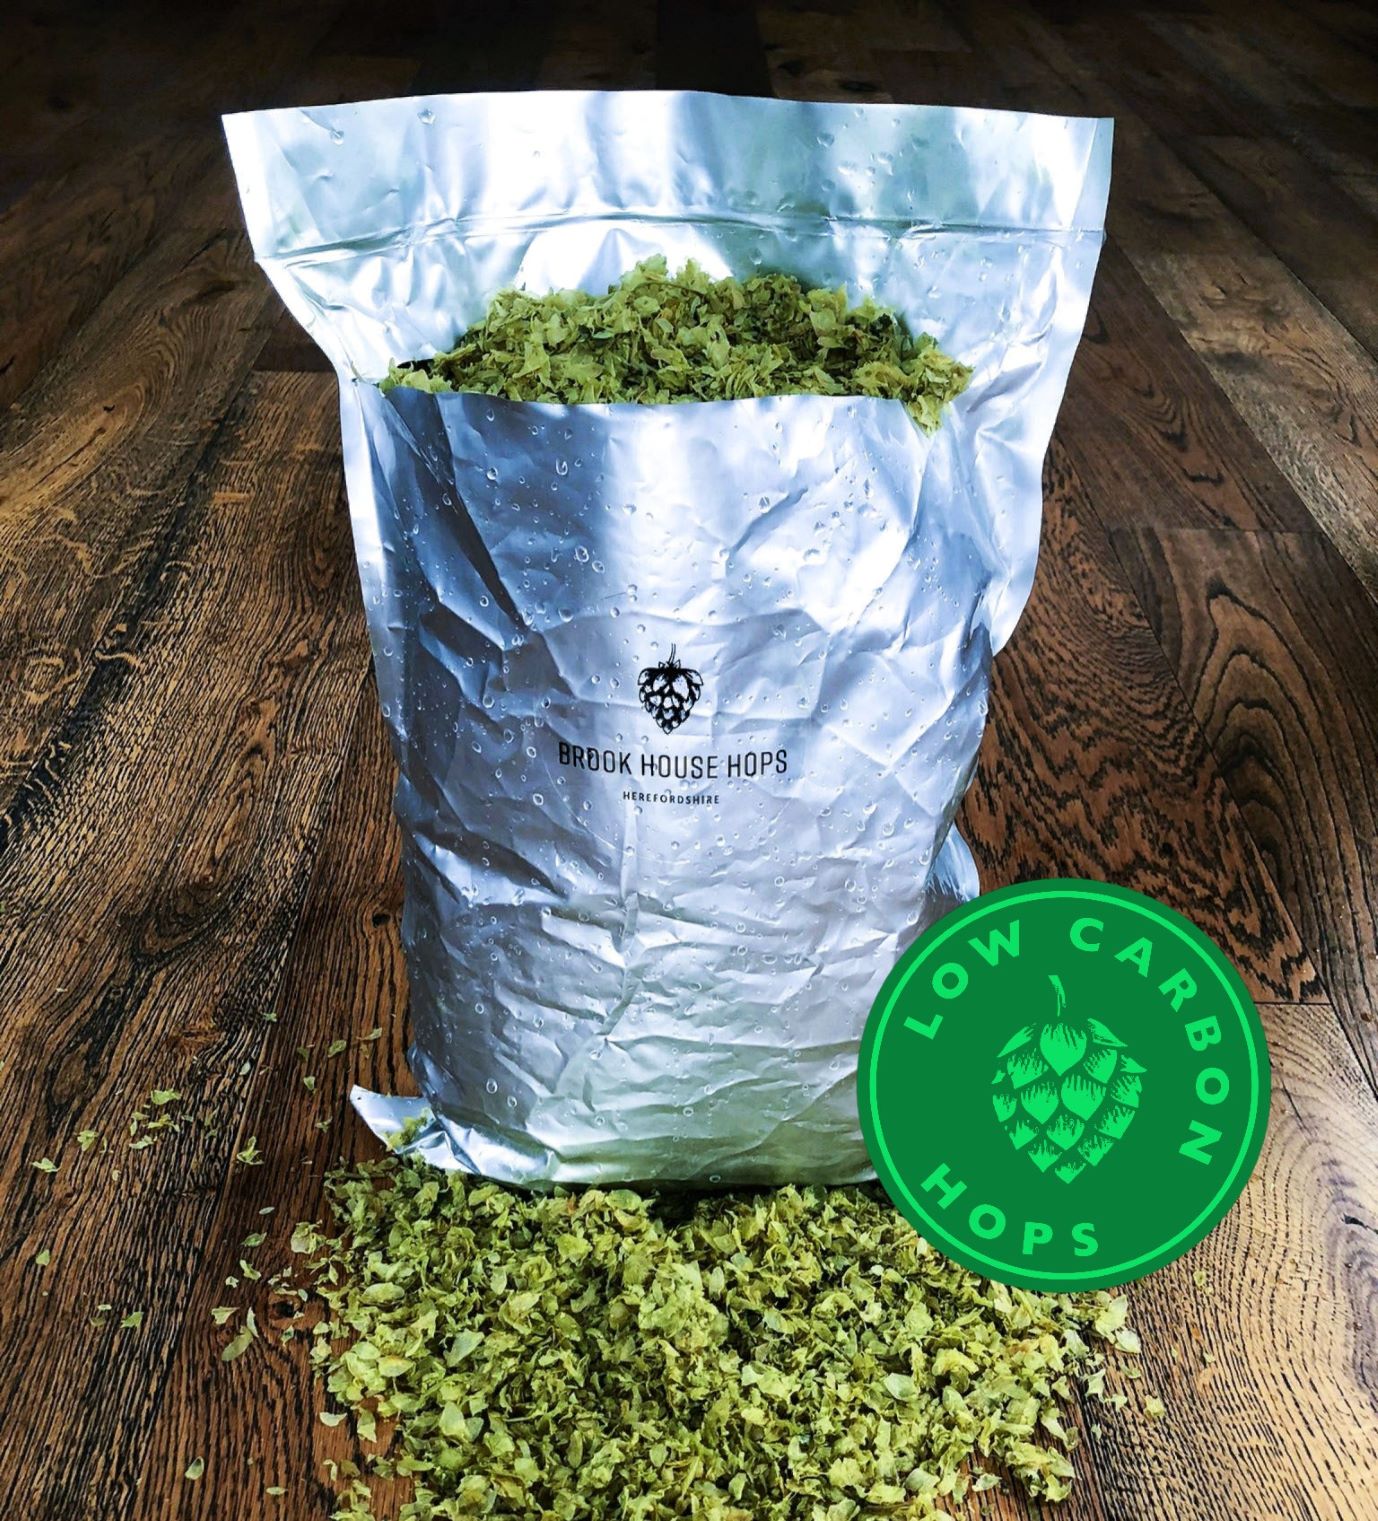 Introducing Low Carbon Hops